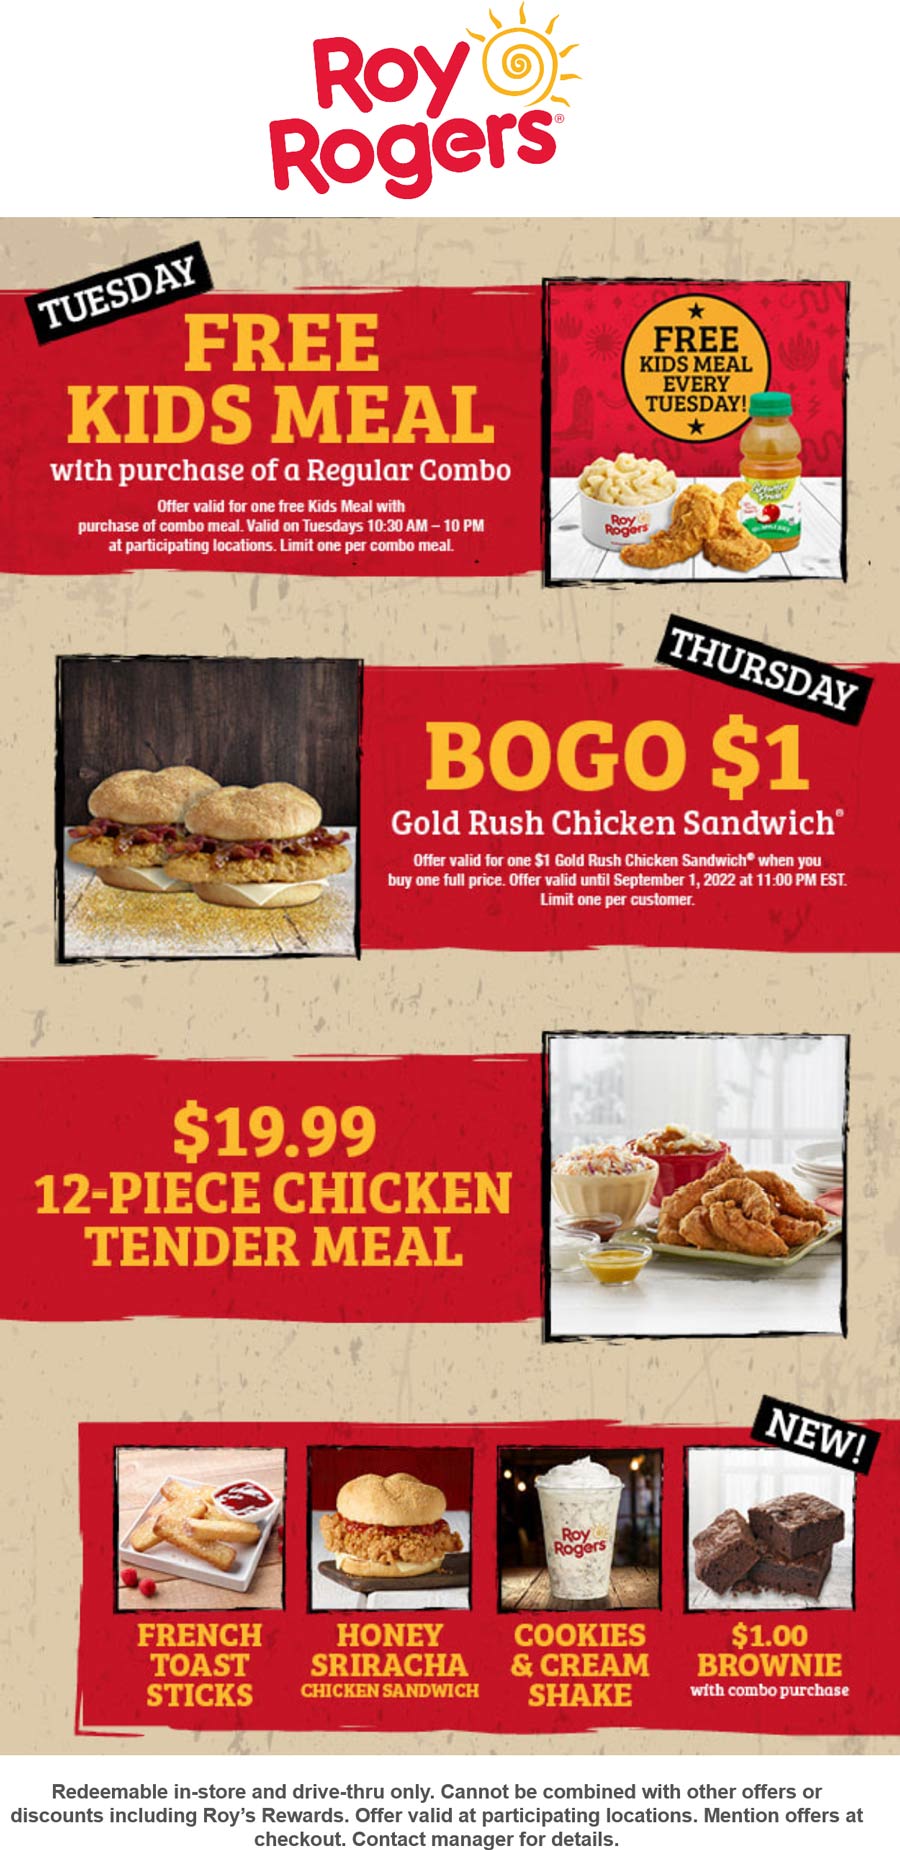 Roy Rogers restaurants Coupon  Free kids meal & more at Roy Rogers #royrogers 